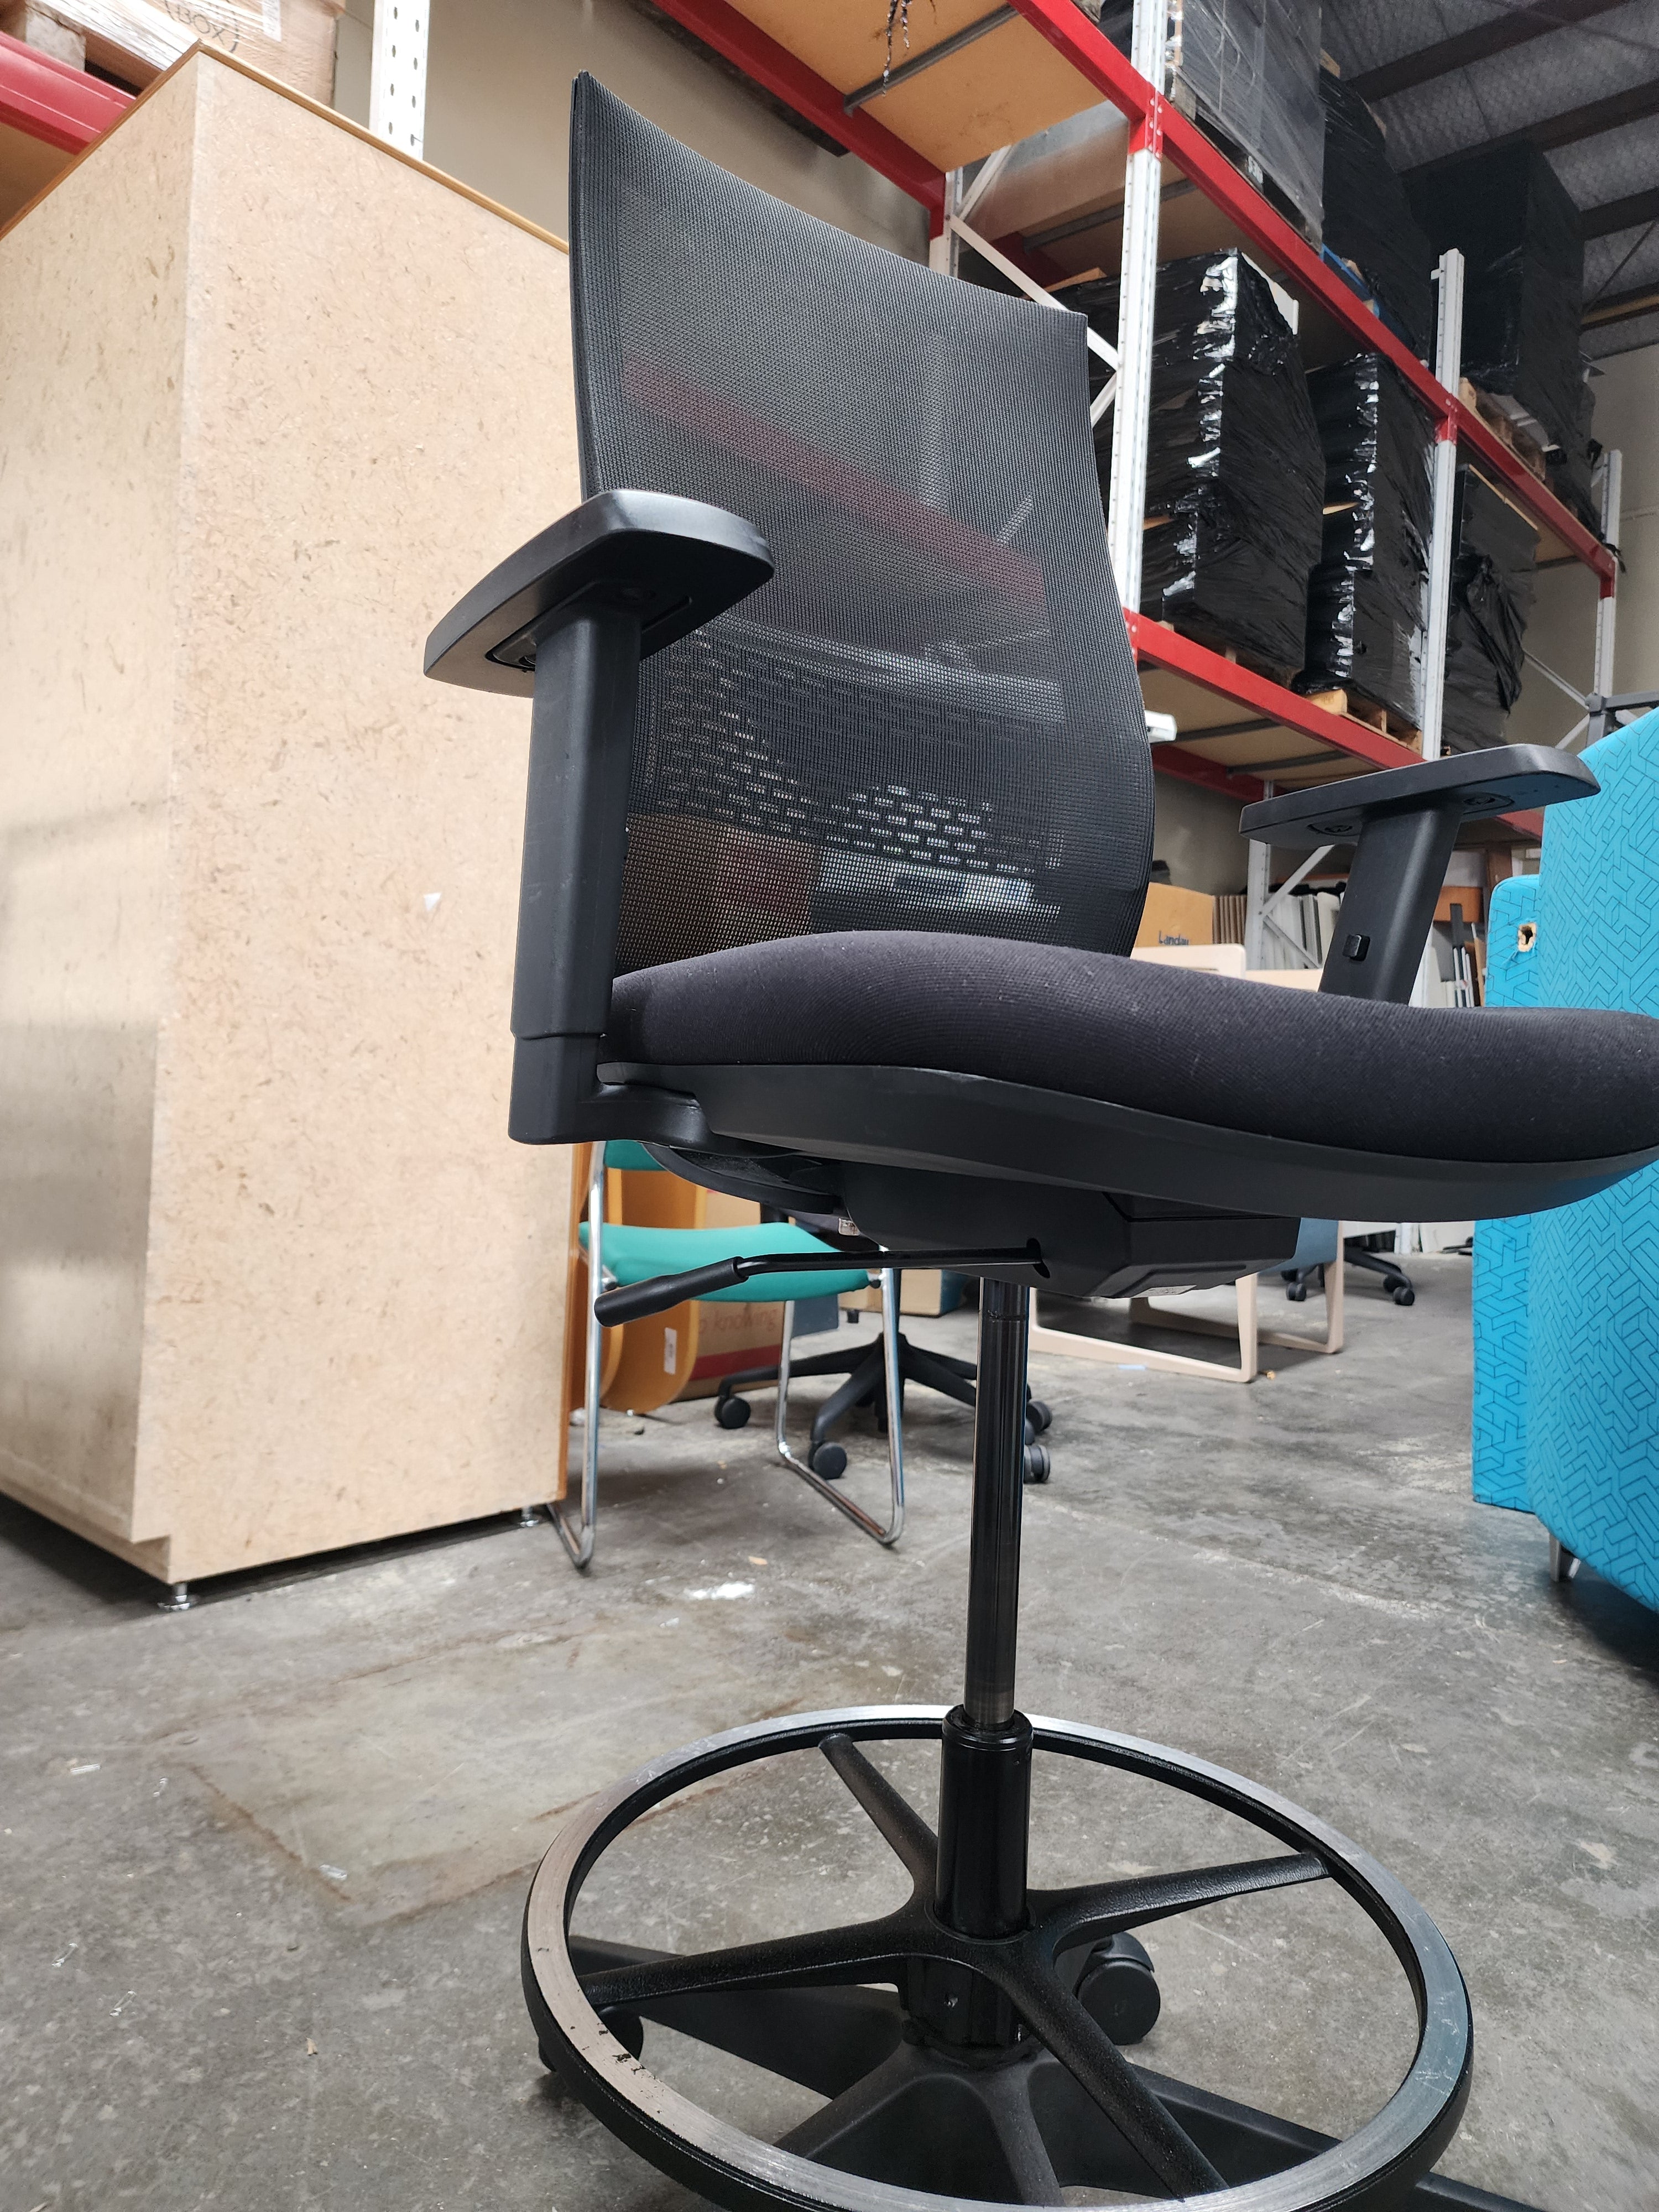 Stool Office Chair